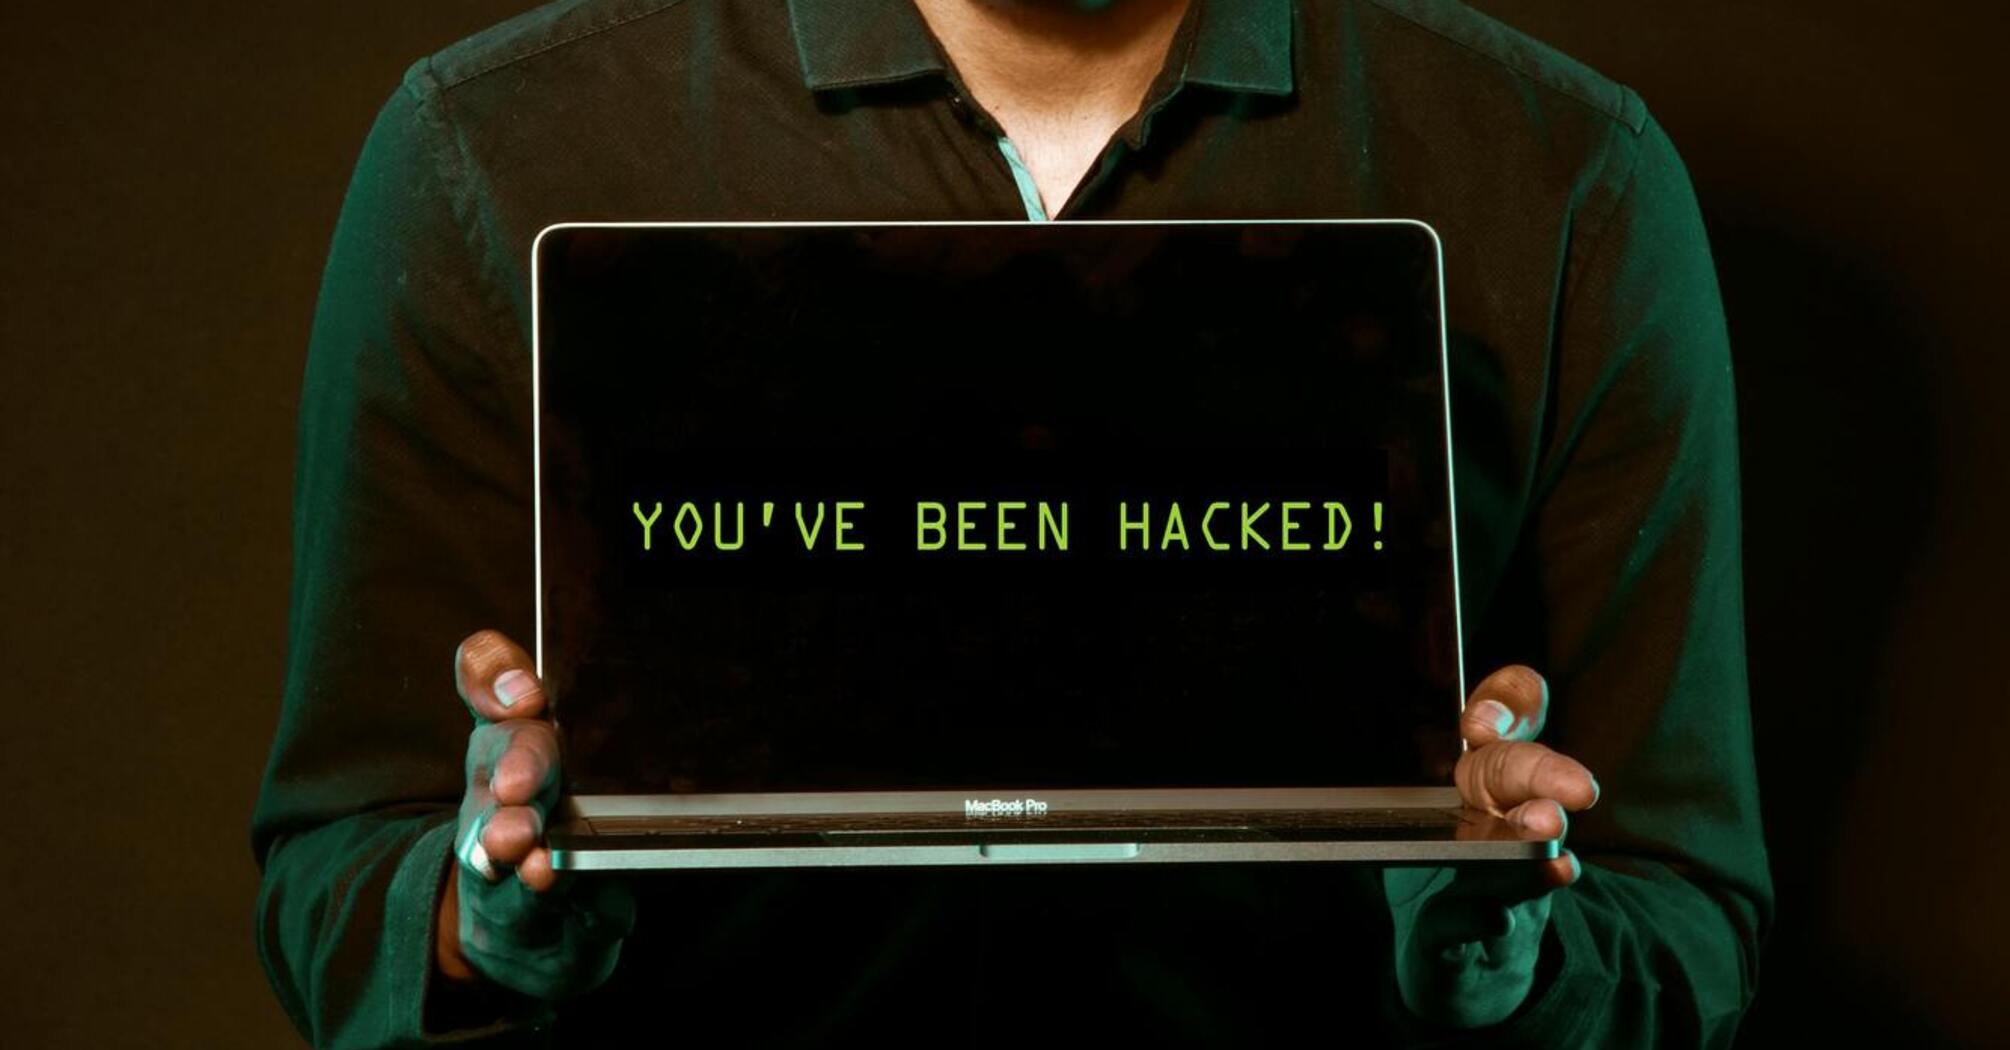 Man holding a laptop displaying 'YOU'VE BEEN HACKED!' message